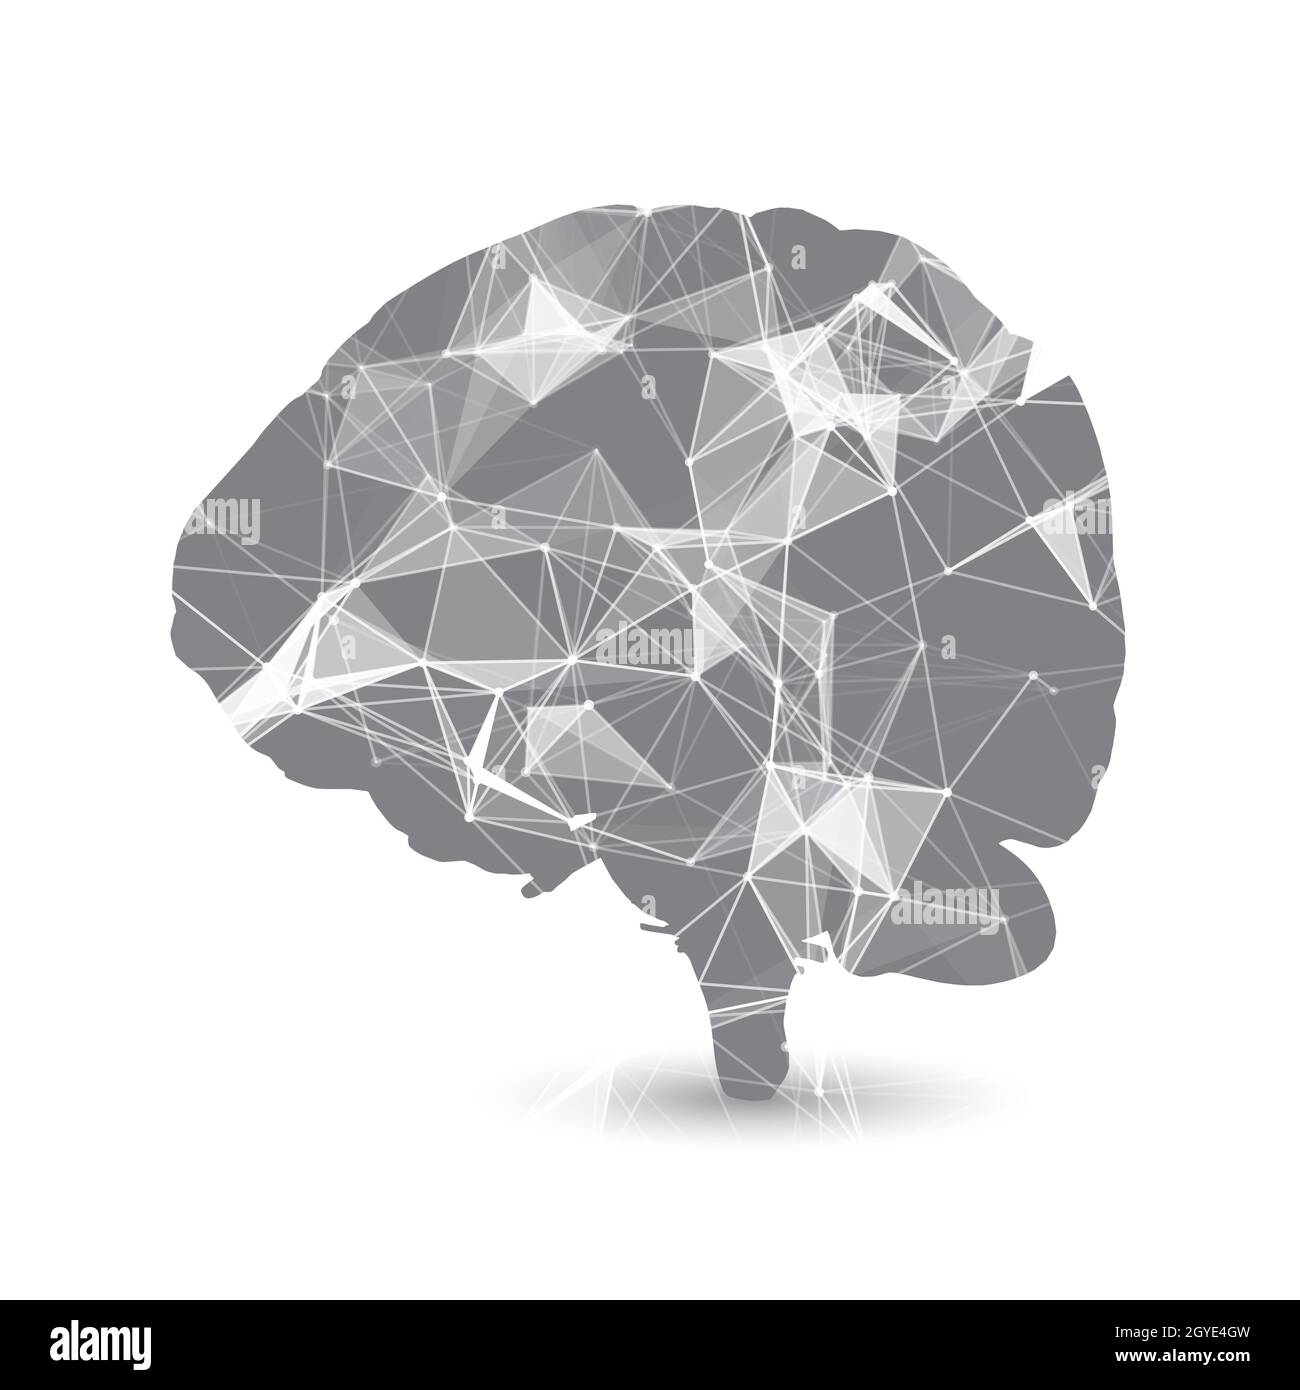 Abstract background with a low poly design on brain silhouette Stock Photo